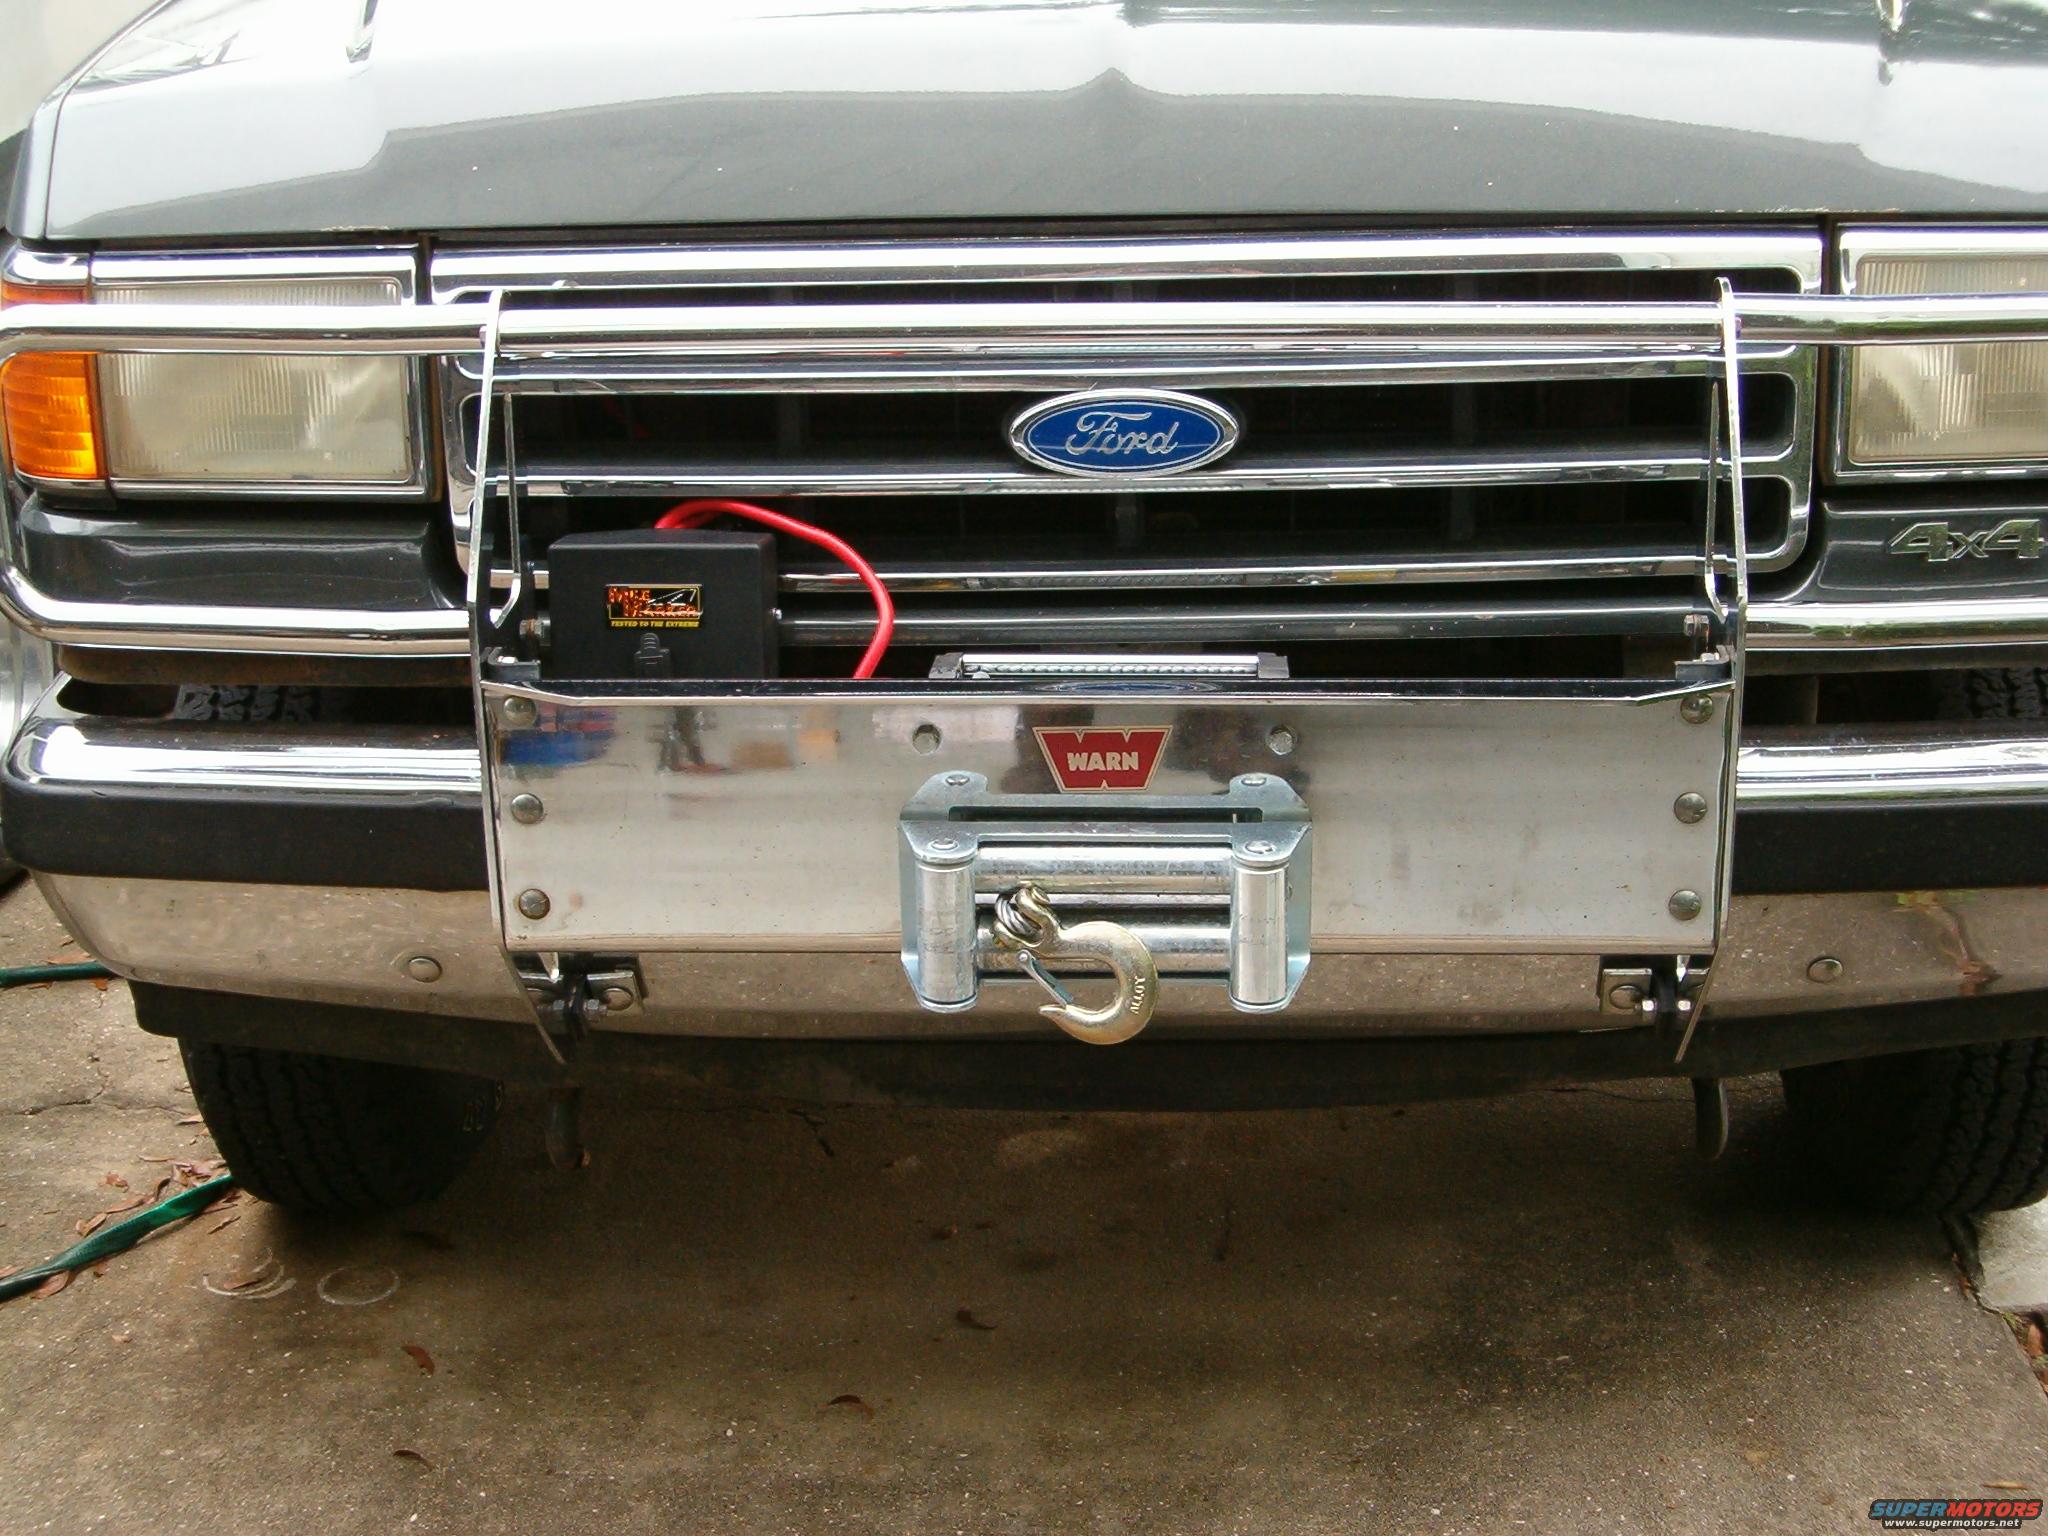 Ford bronco winch bumpers #8